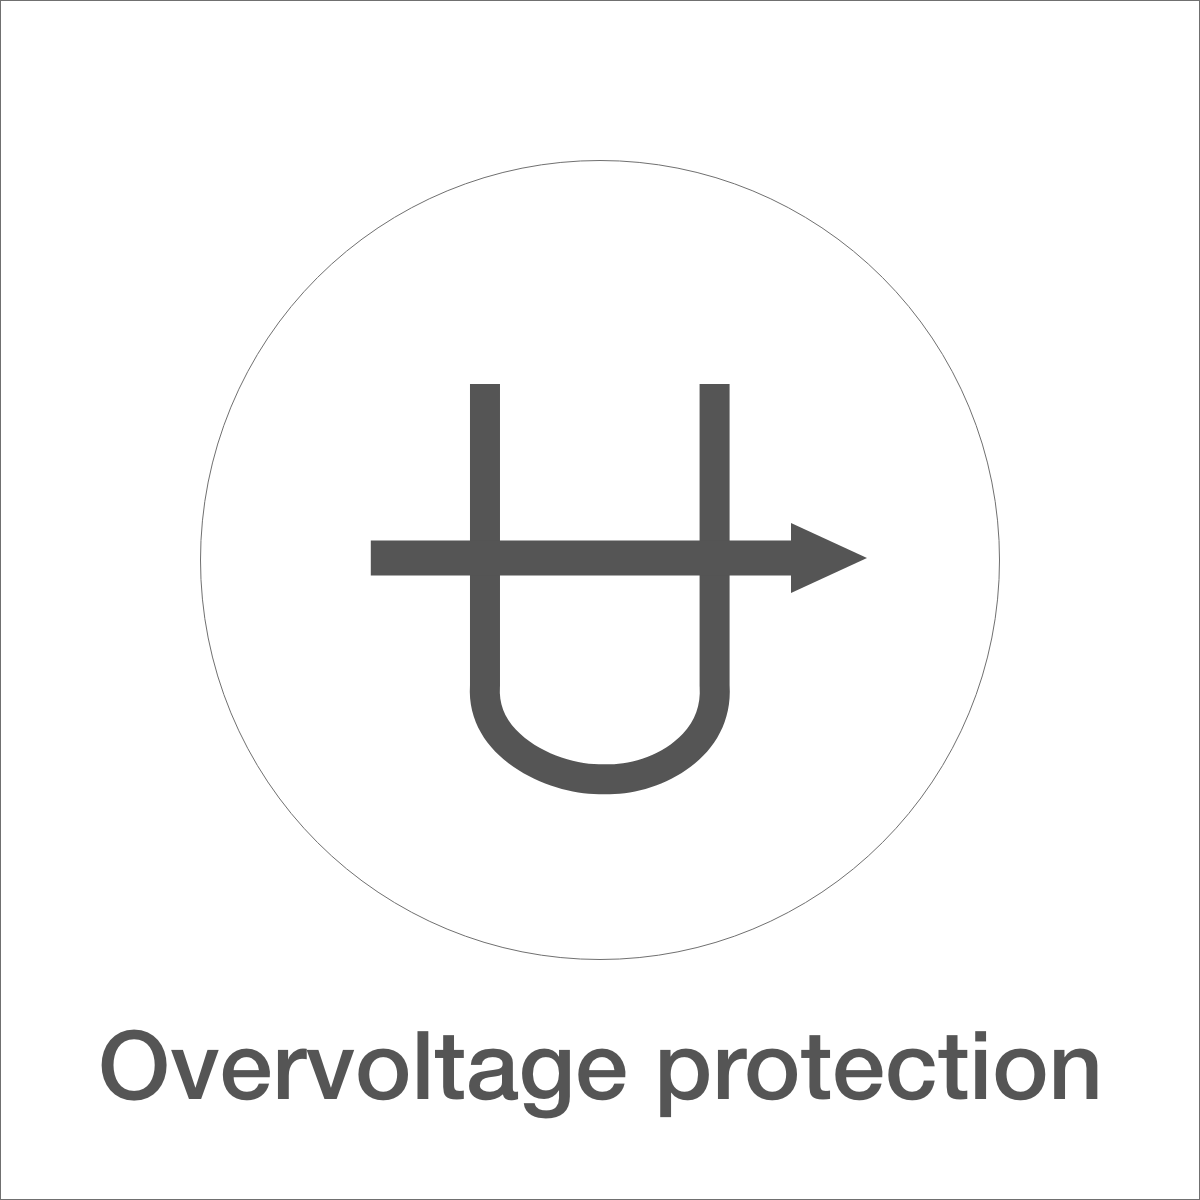 Overvoltage protection icon